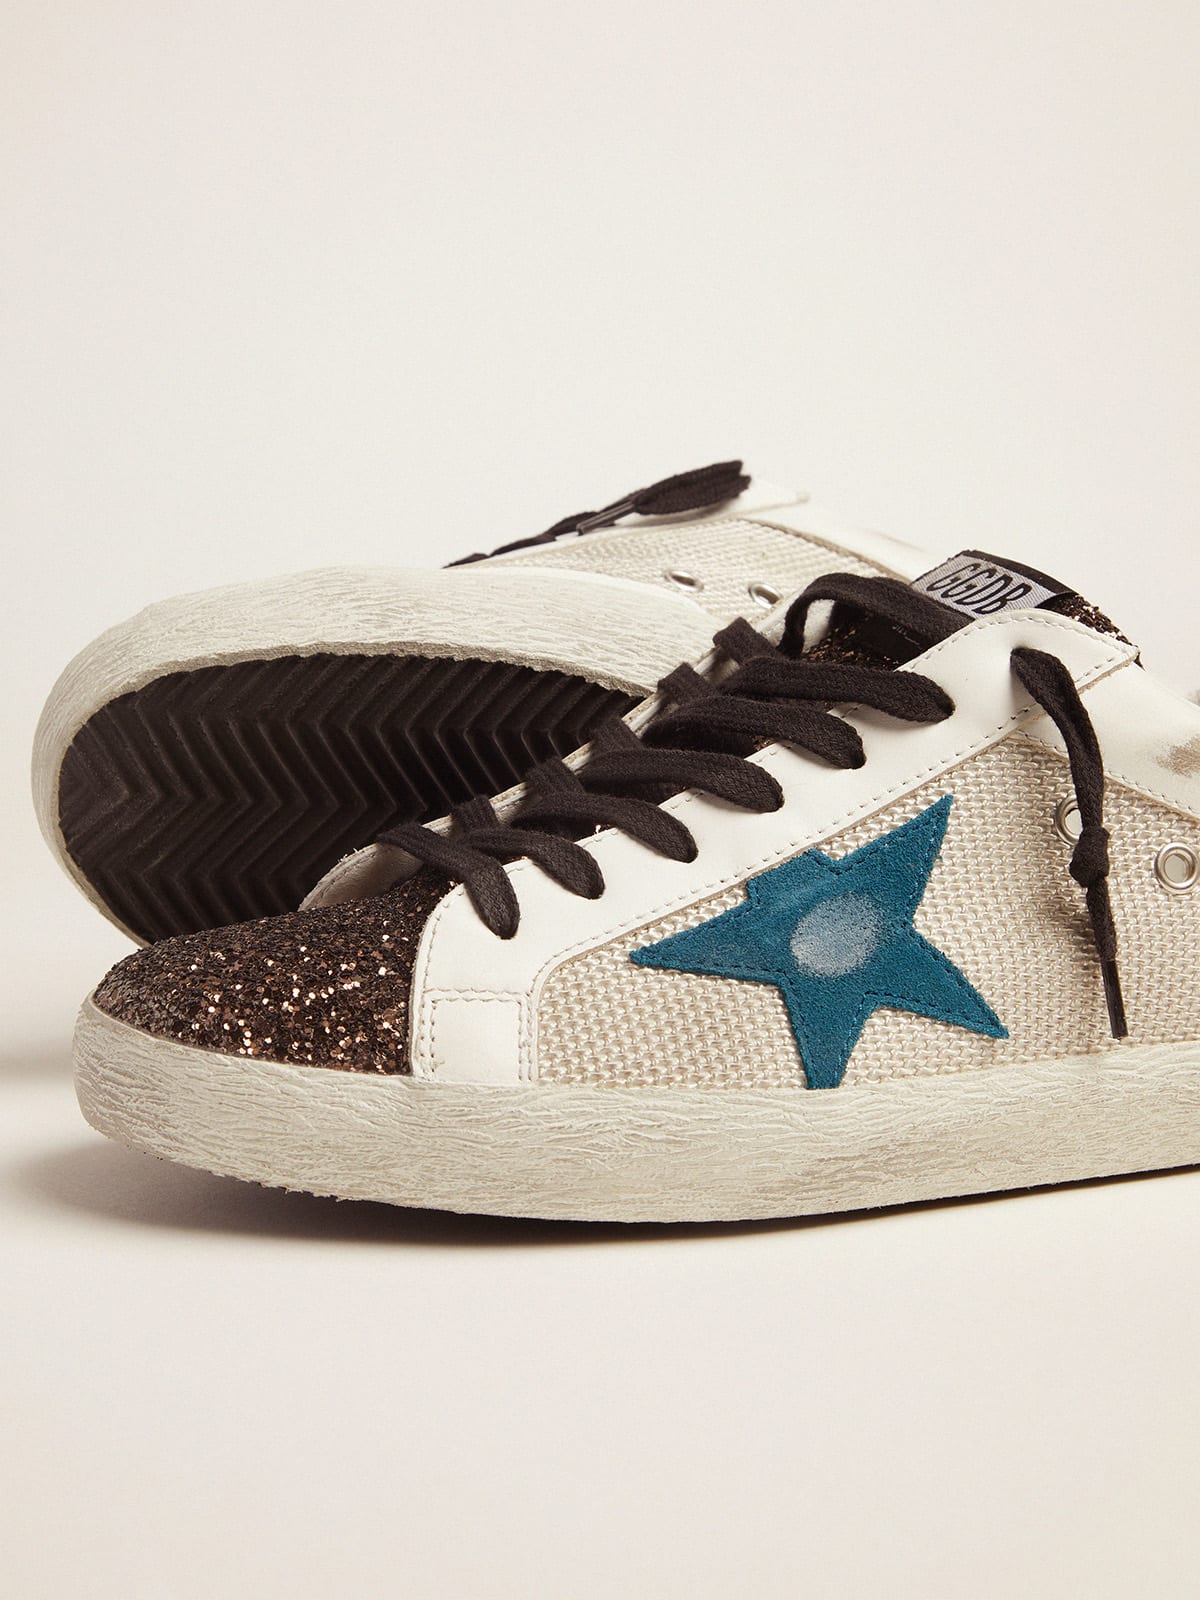 Golden Goose - Super-Star sneakers with glitter insert and blue storm suede star in 